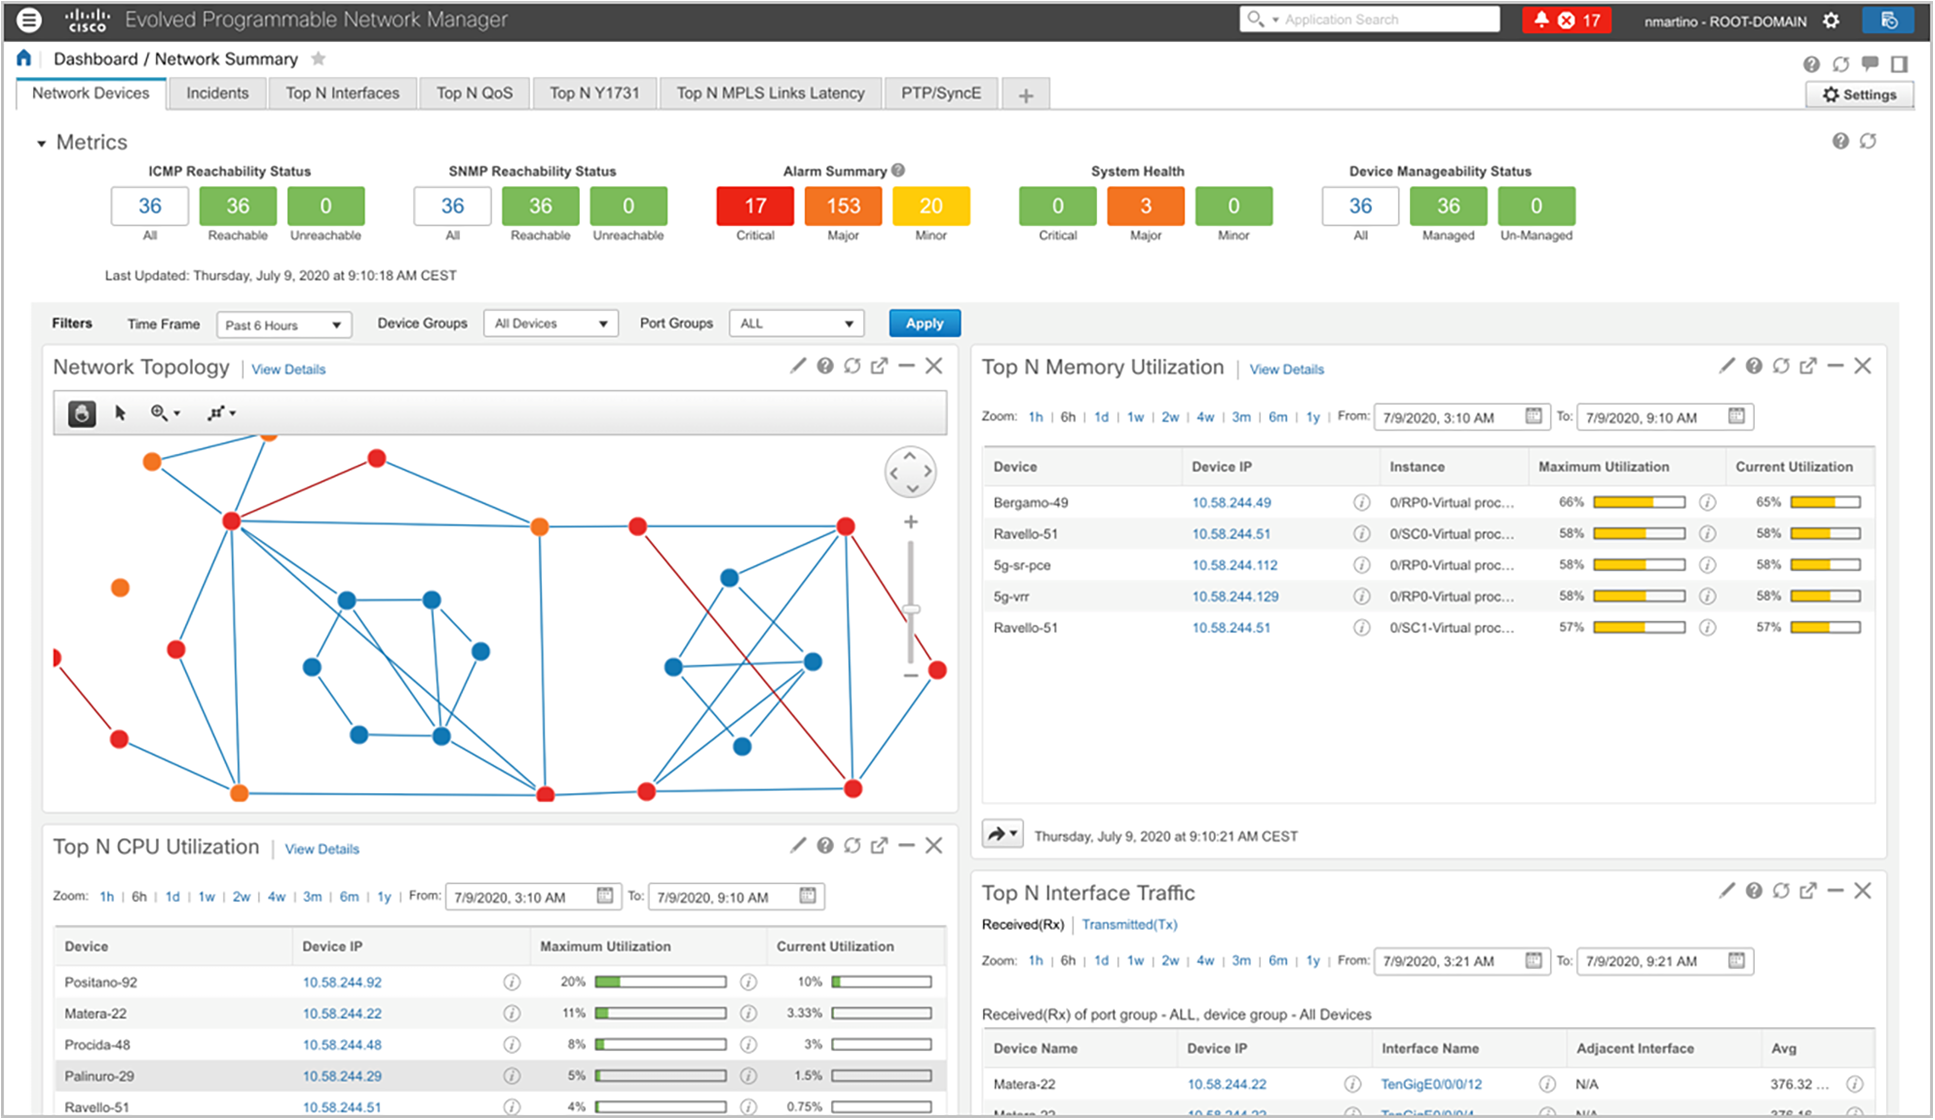 Cisco Evolved Programmable Network Manager Dashboard